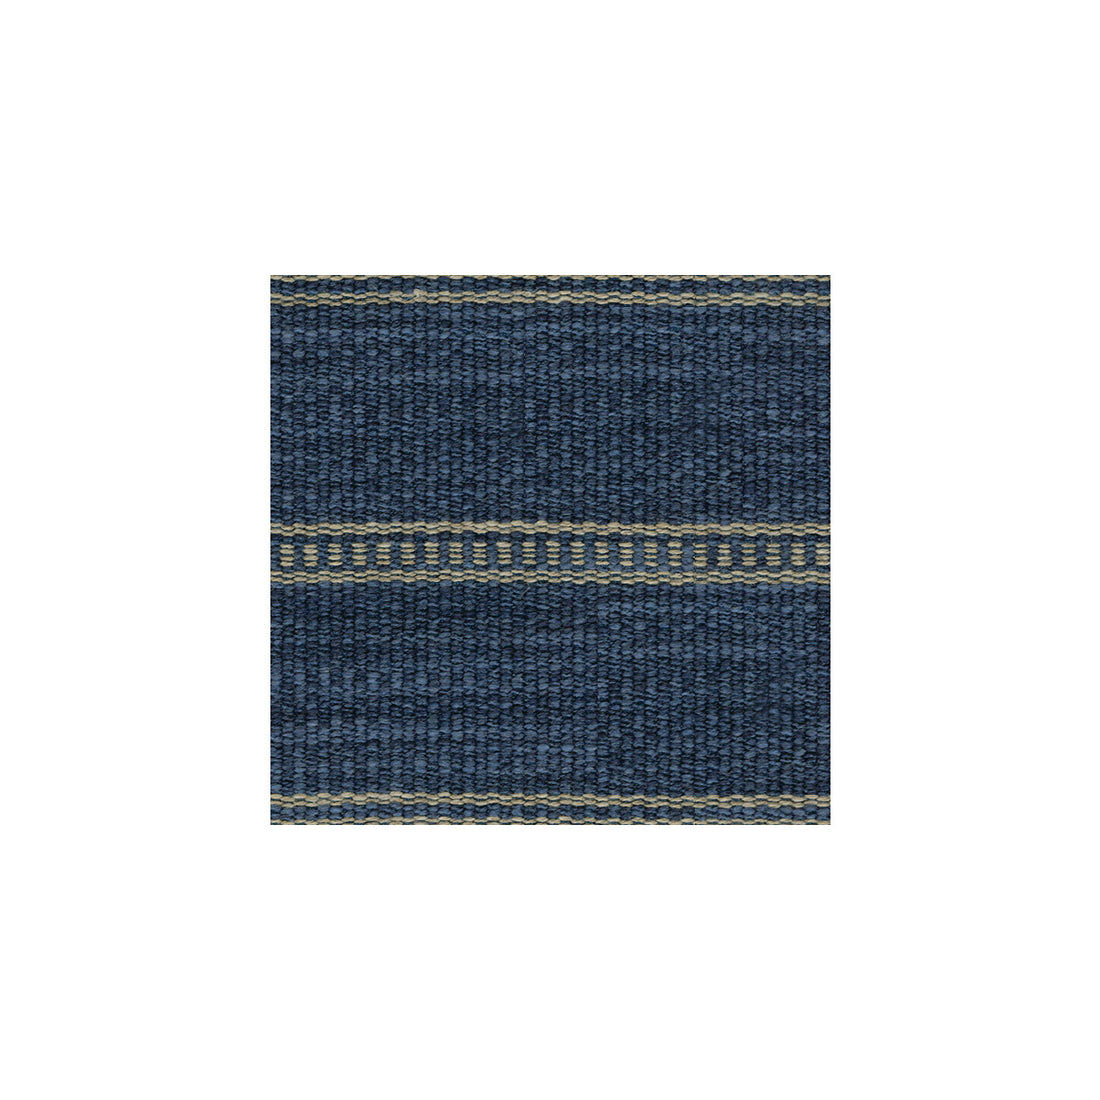 Saddle Stripe fabric in indigo color - pattern 31511.516.0 - by Kravet Couture in the Nomad Chic collection